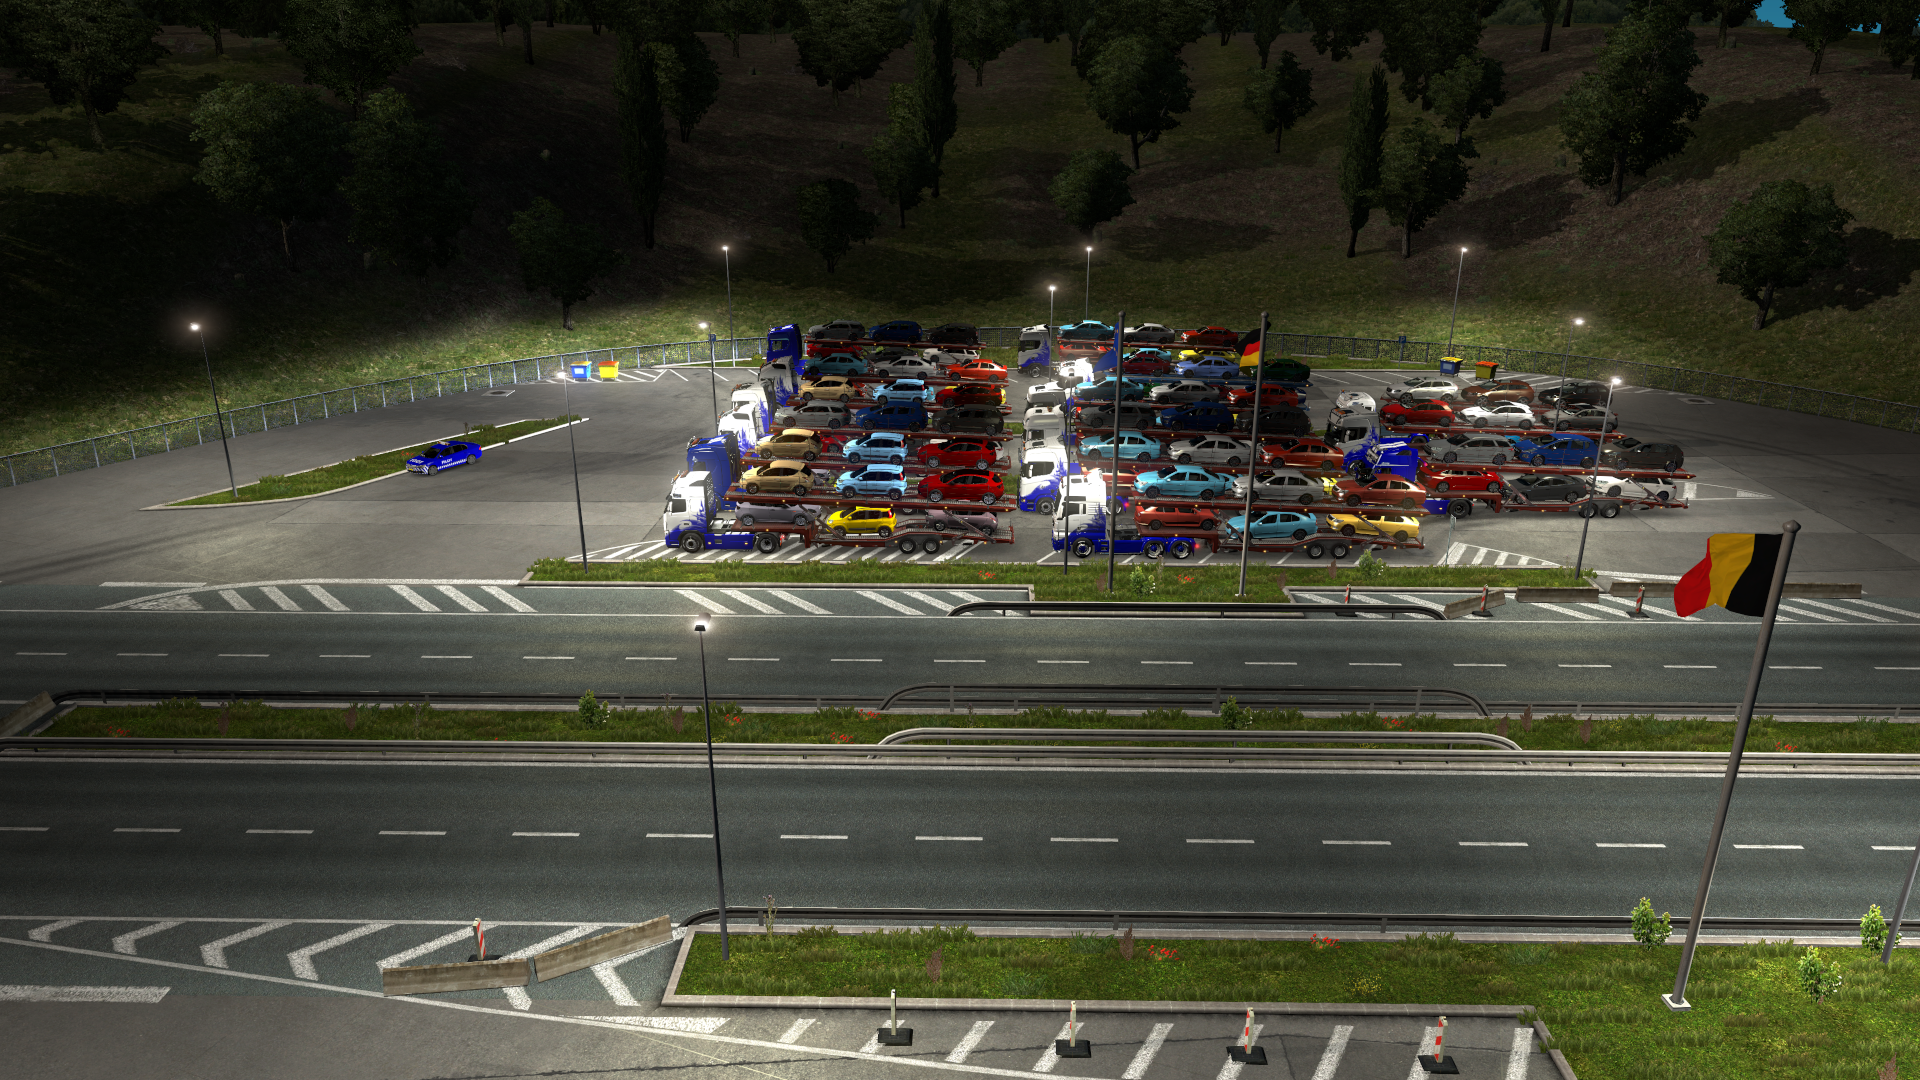 ets2_20200320_225502_00.png